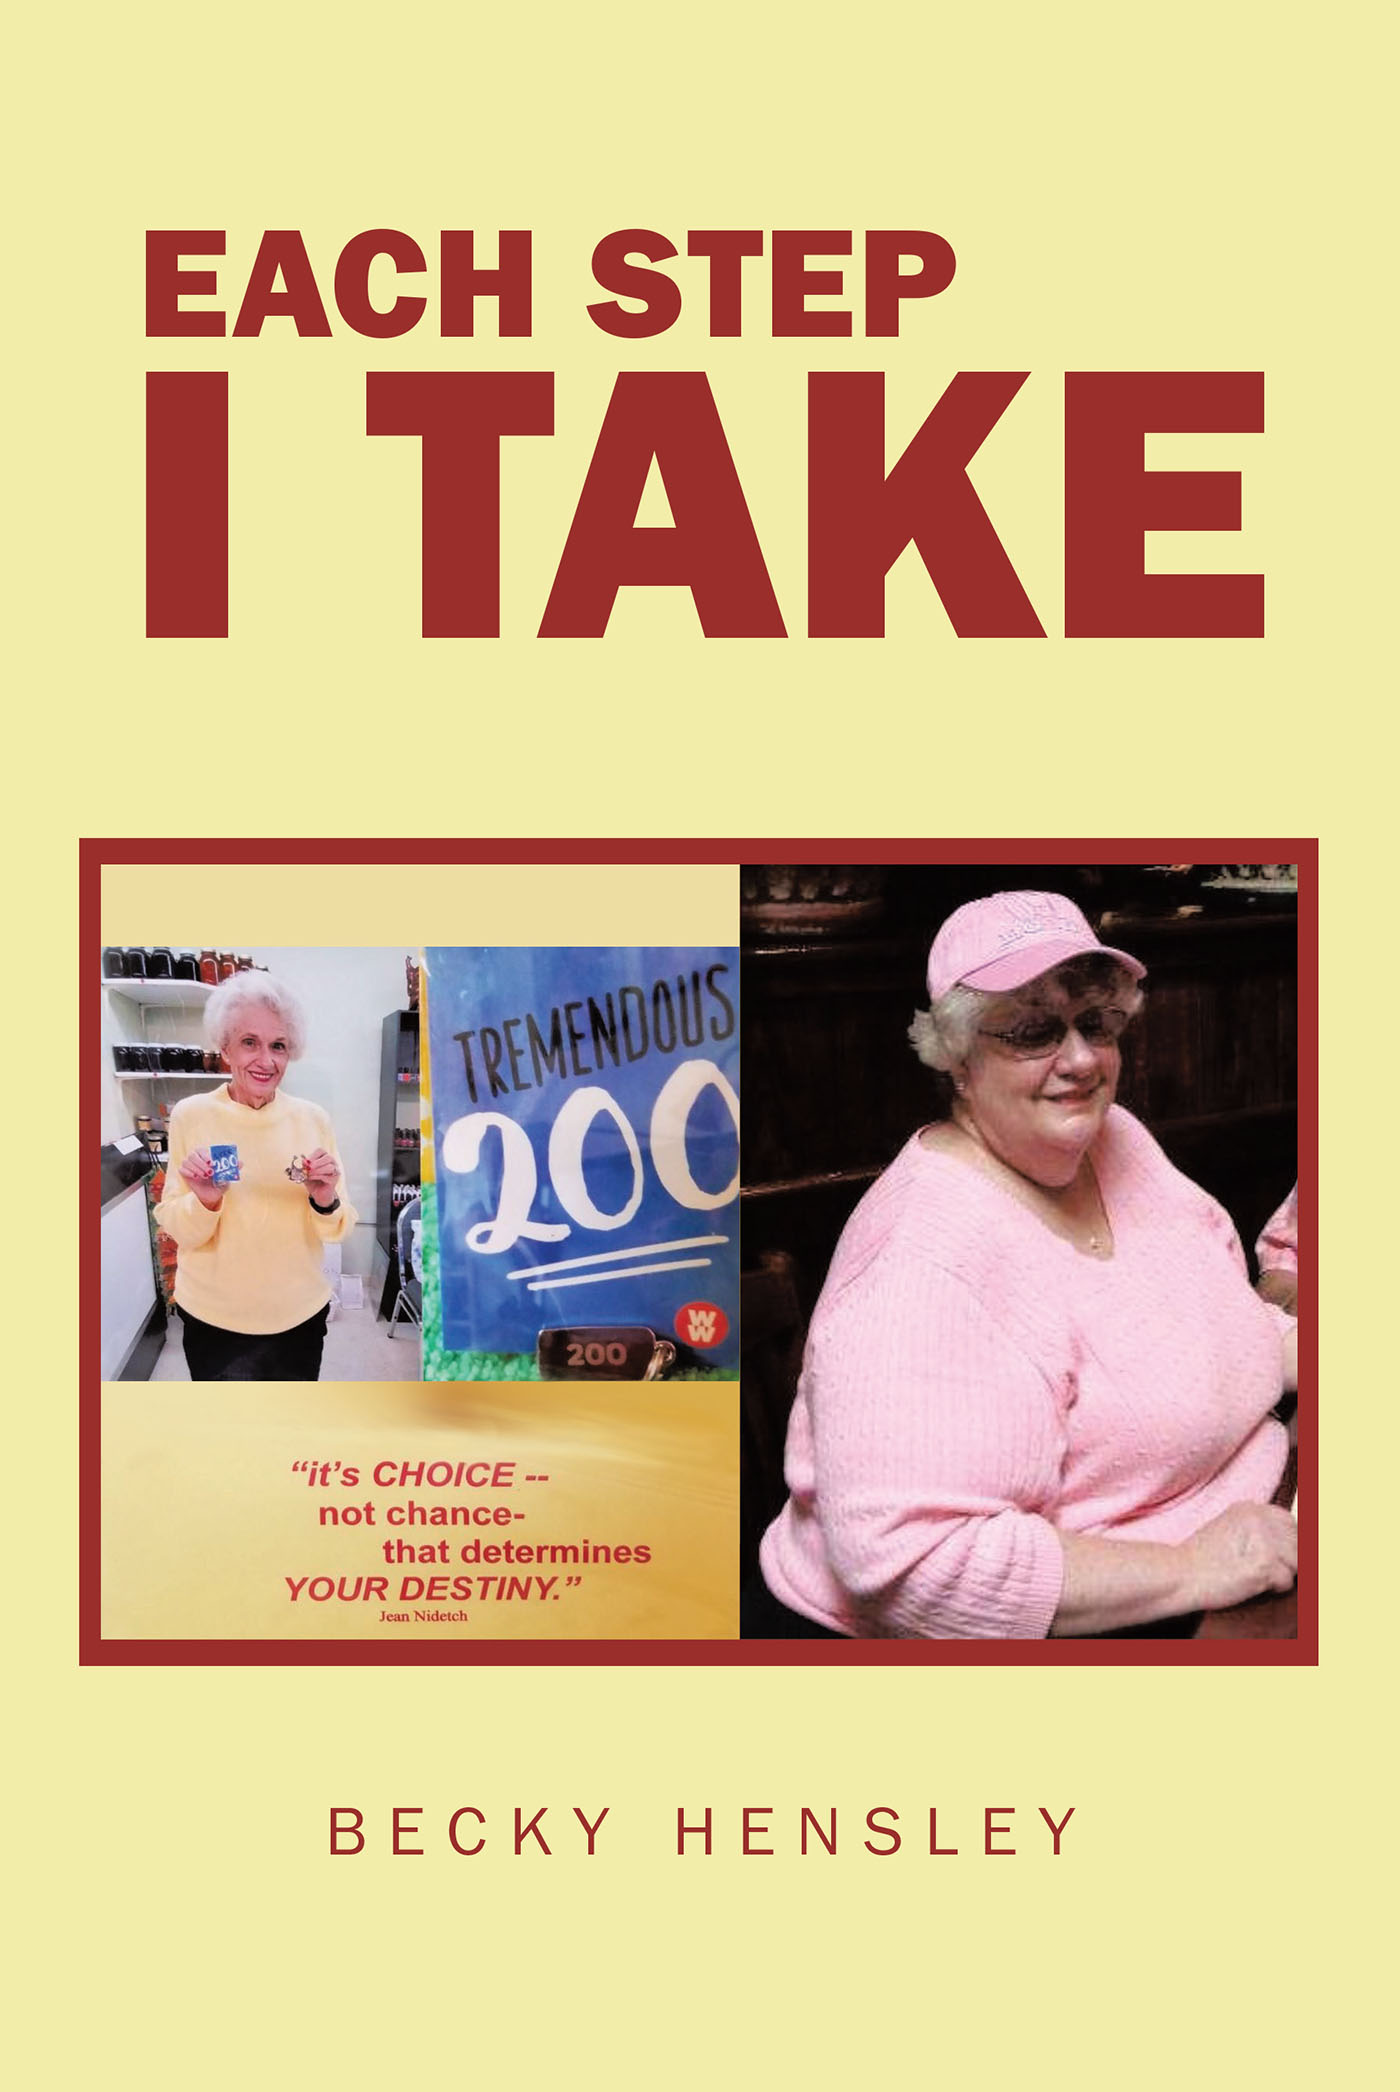 Becky Hensley’s Newly Released "Each Step I Take" is an Encouraging Story of One Woman’s Journey to Healthier Habits and Lasting Weight Loss